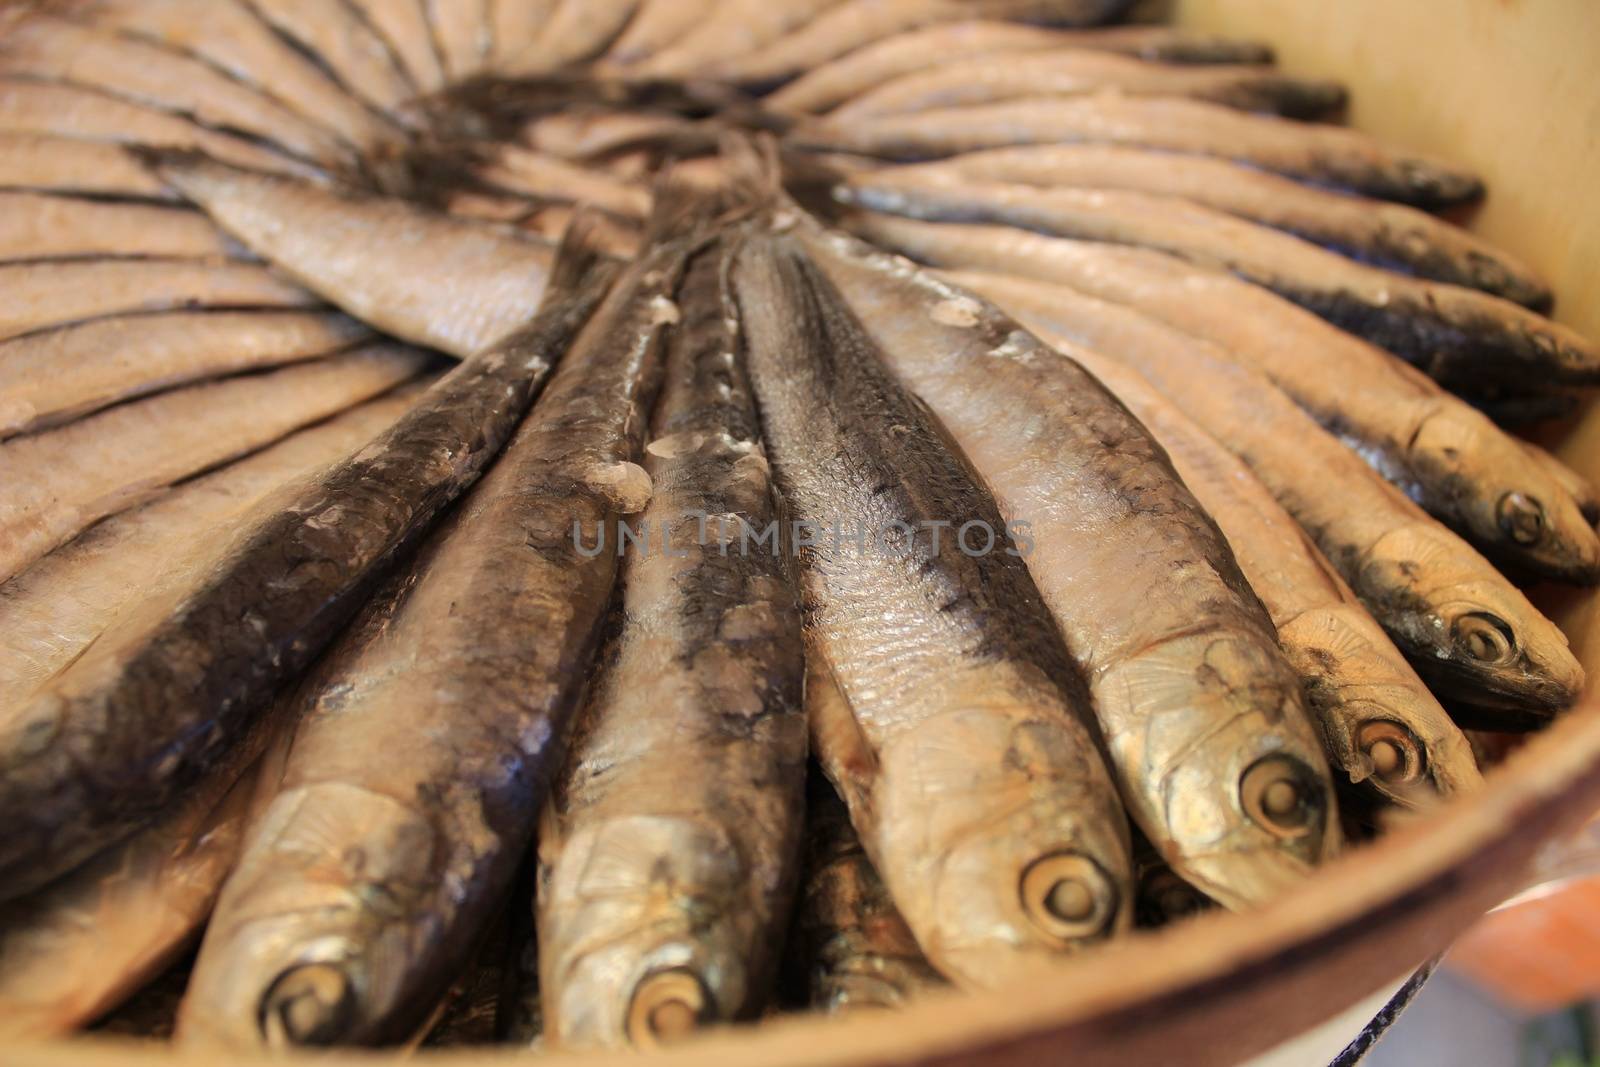 Salted fish products for sale at a market stall in Spain